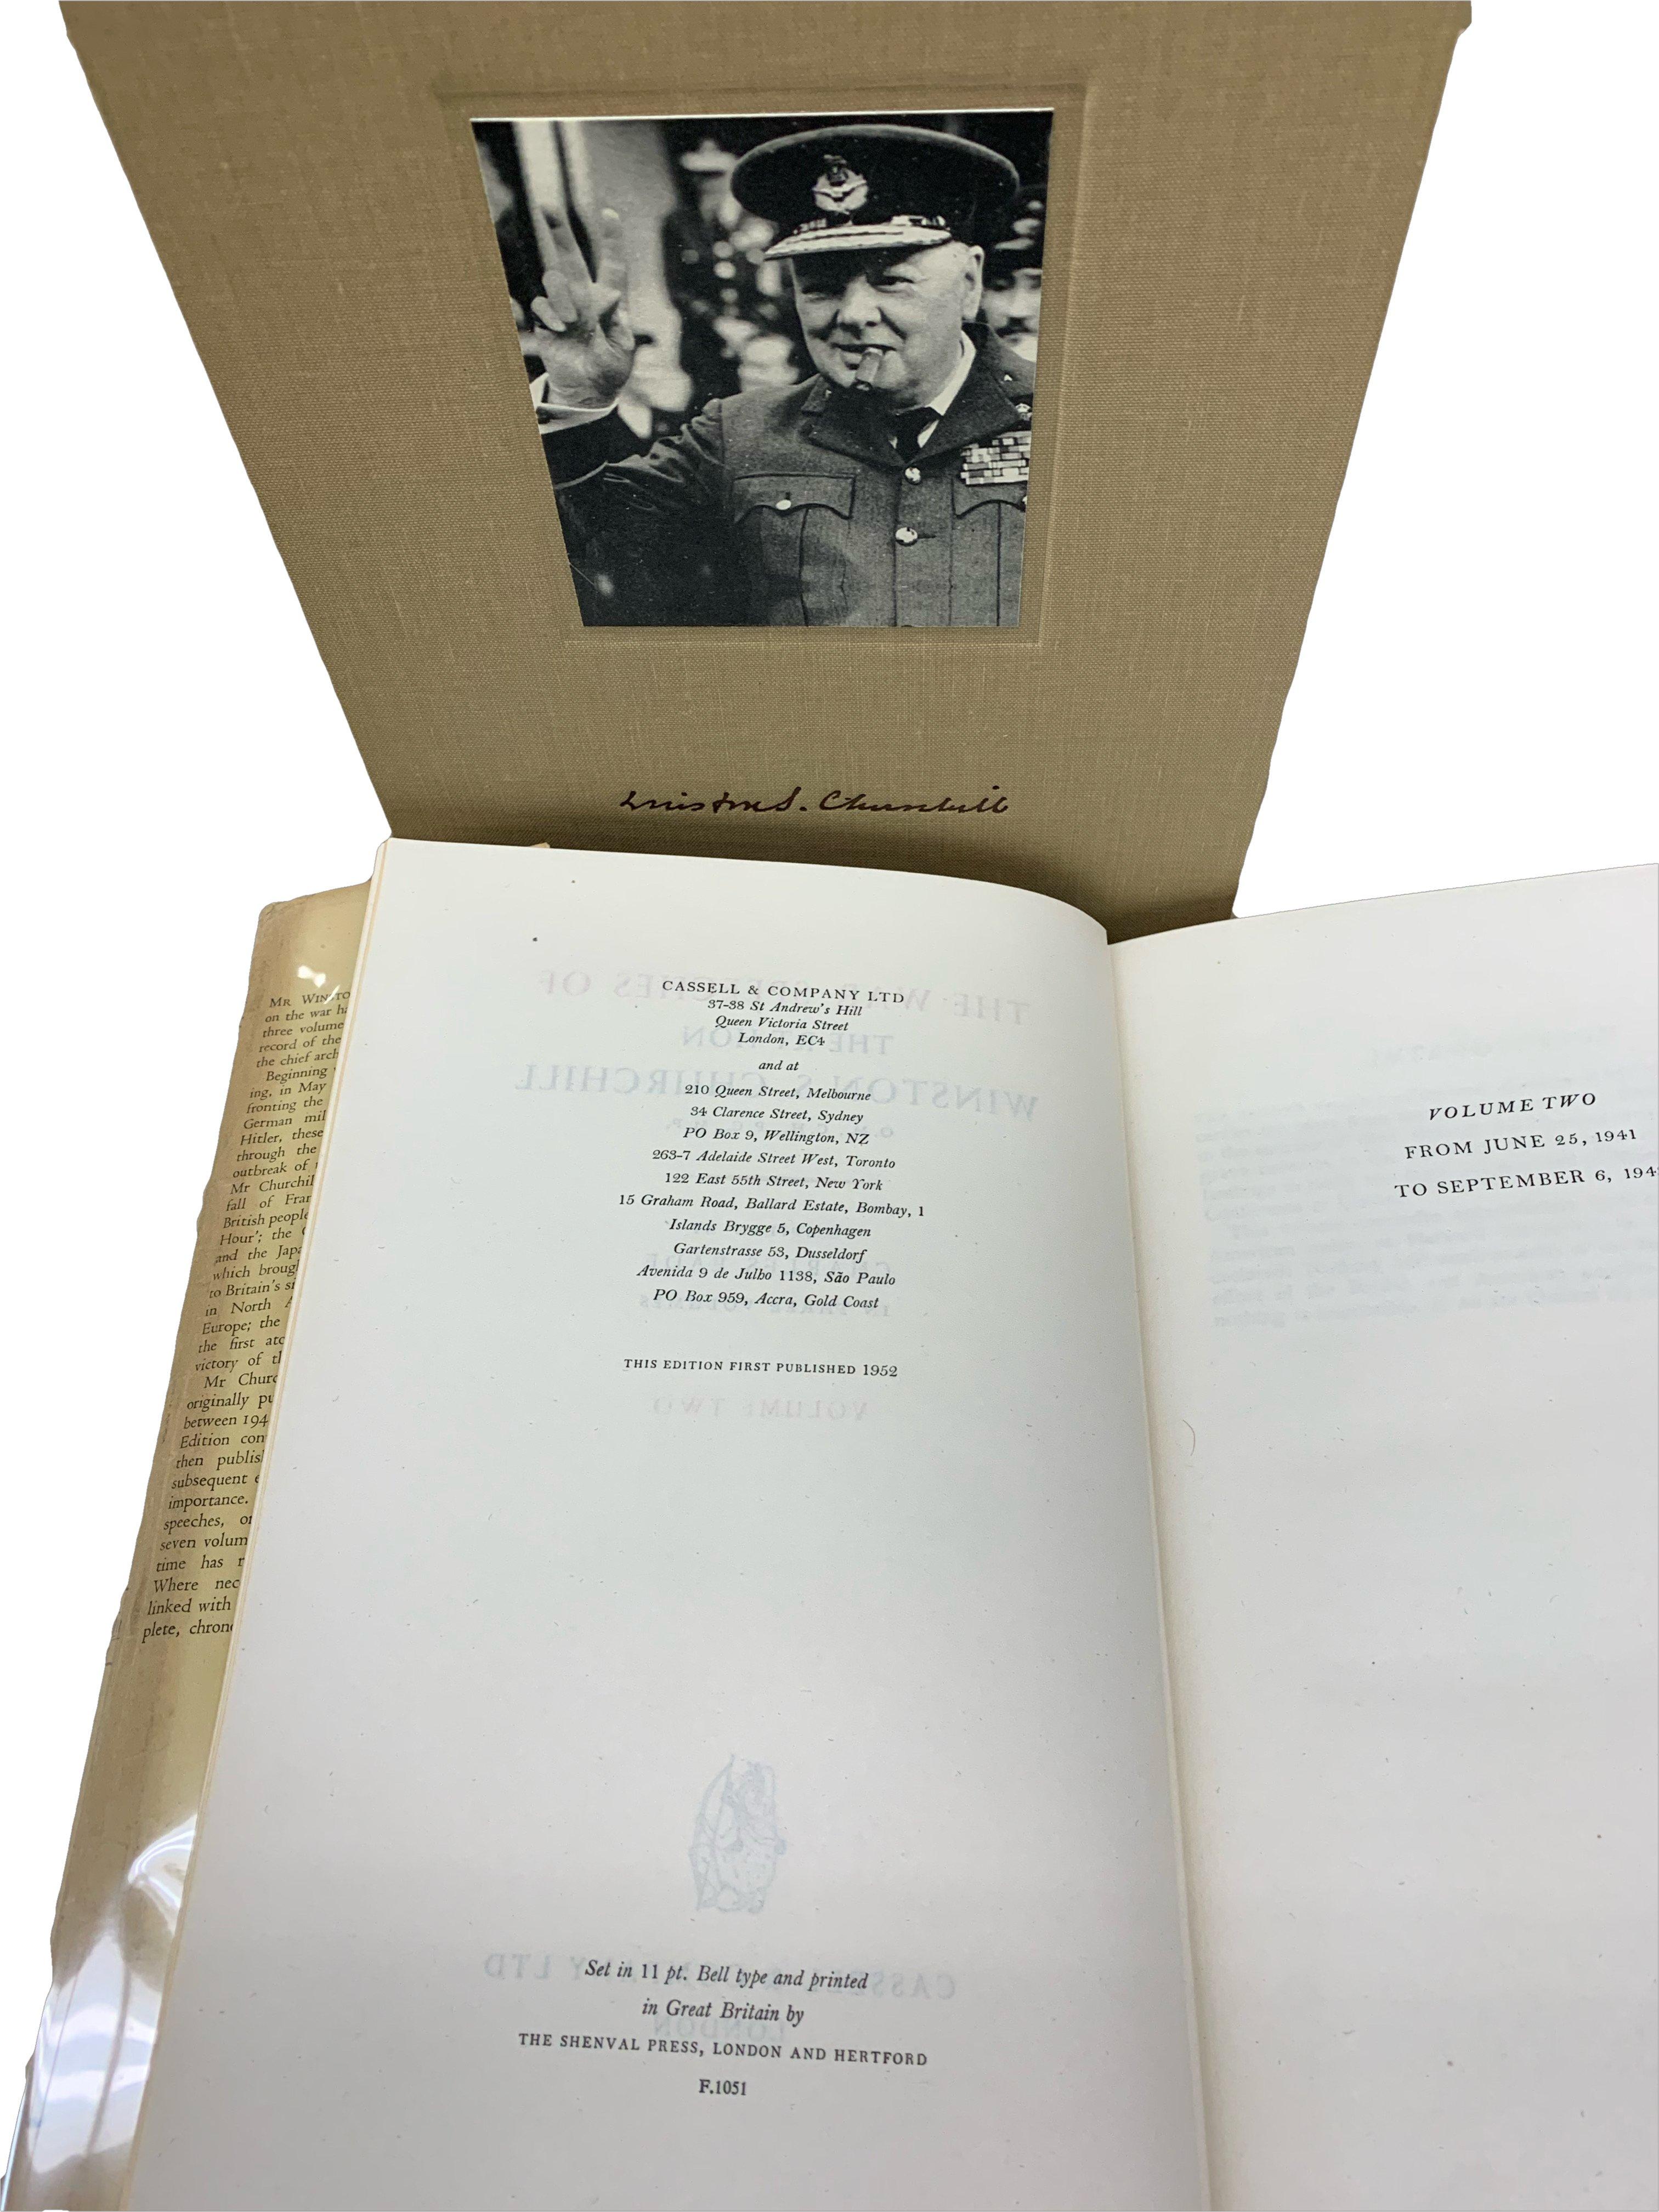 The War Speeches of the Rt. Hon. Winston S. Churchill, Signed by Churchill 1